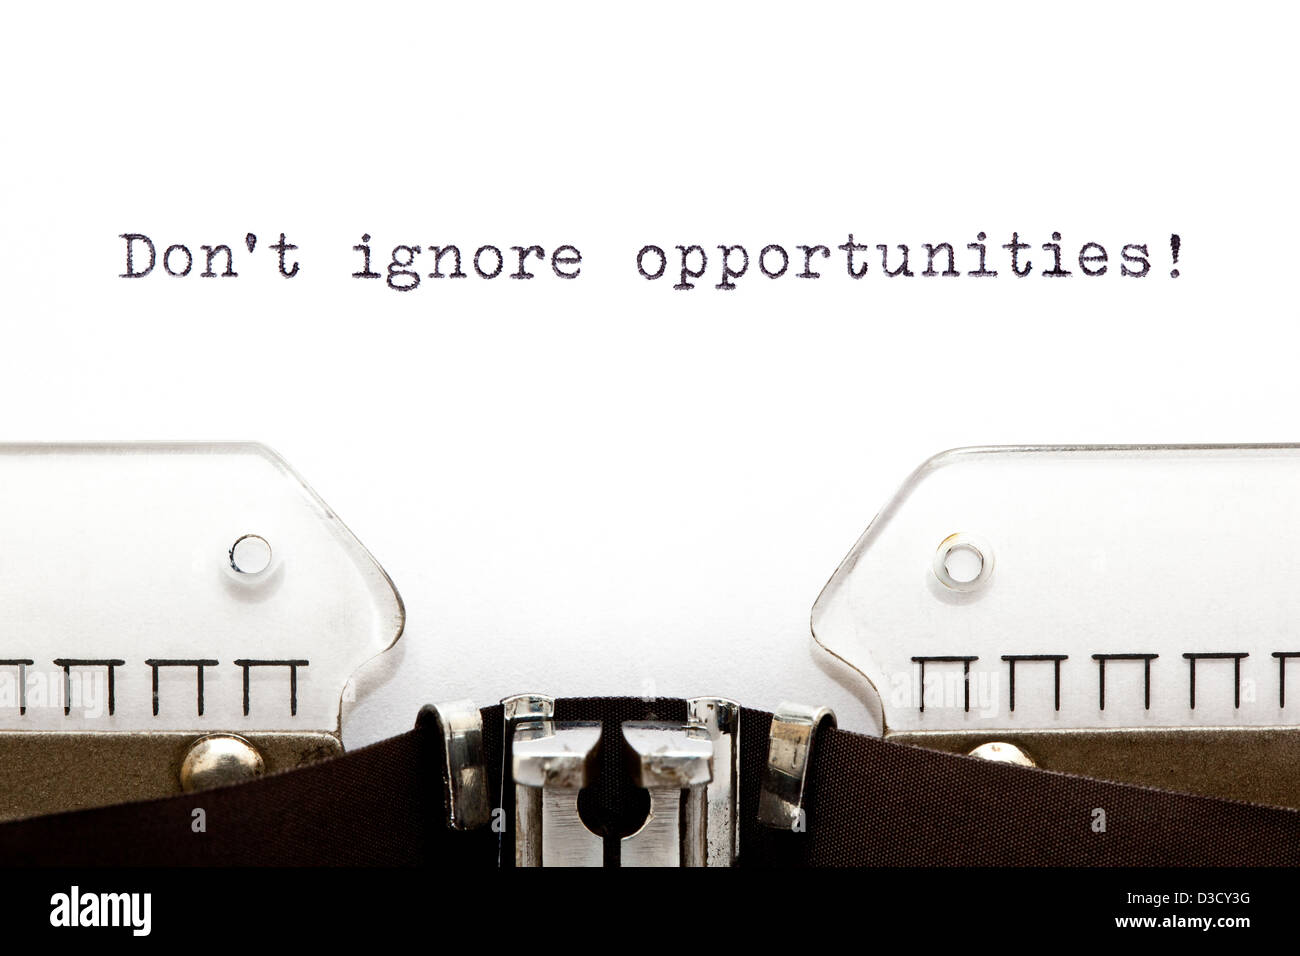 Don't Ignore Opportunities printed on an old typewriter. Stock Photo